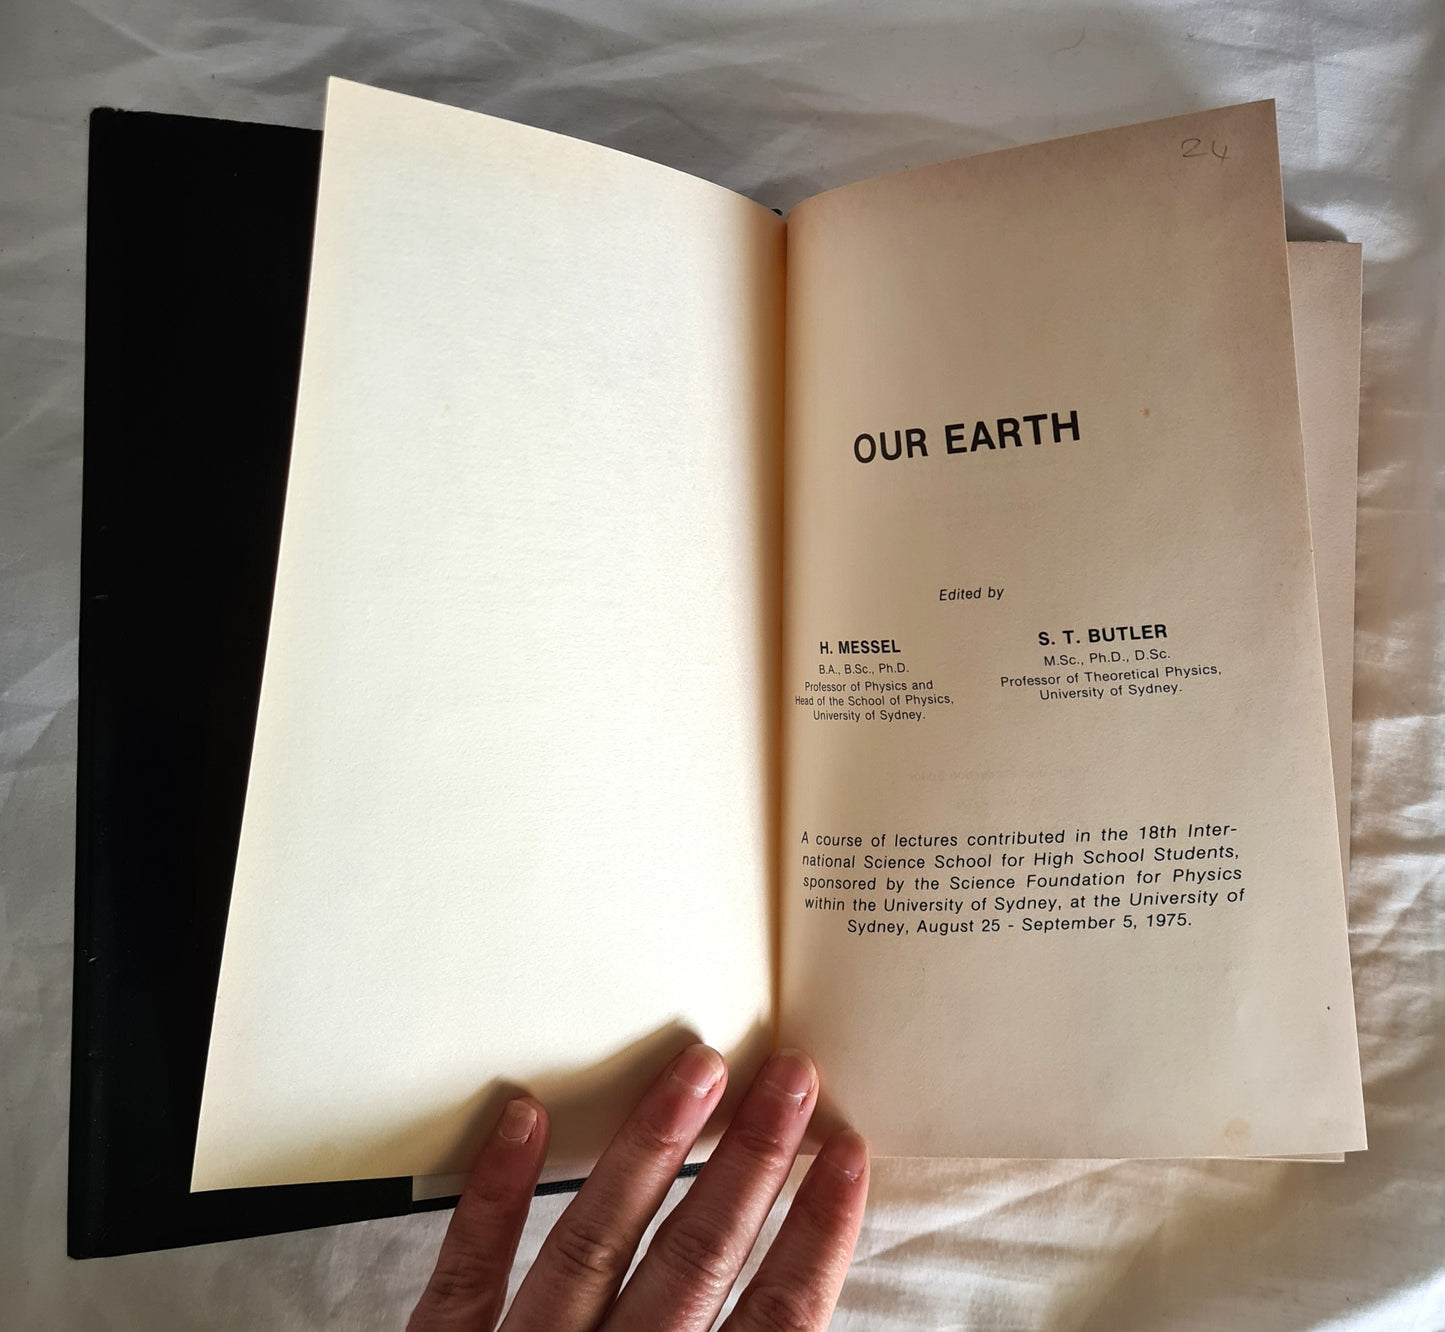 Our Earth by H. Messel and S. T. Butler